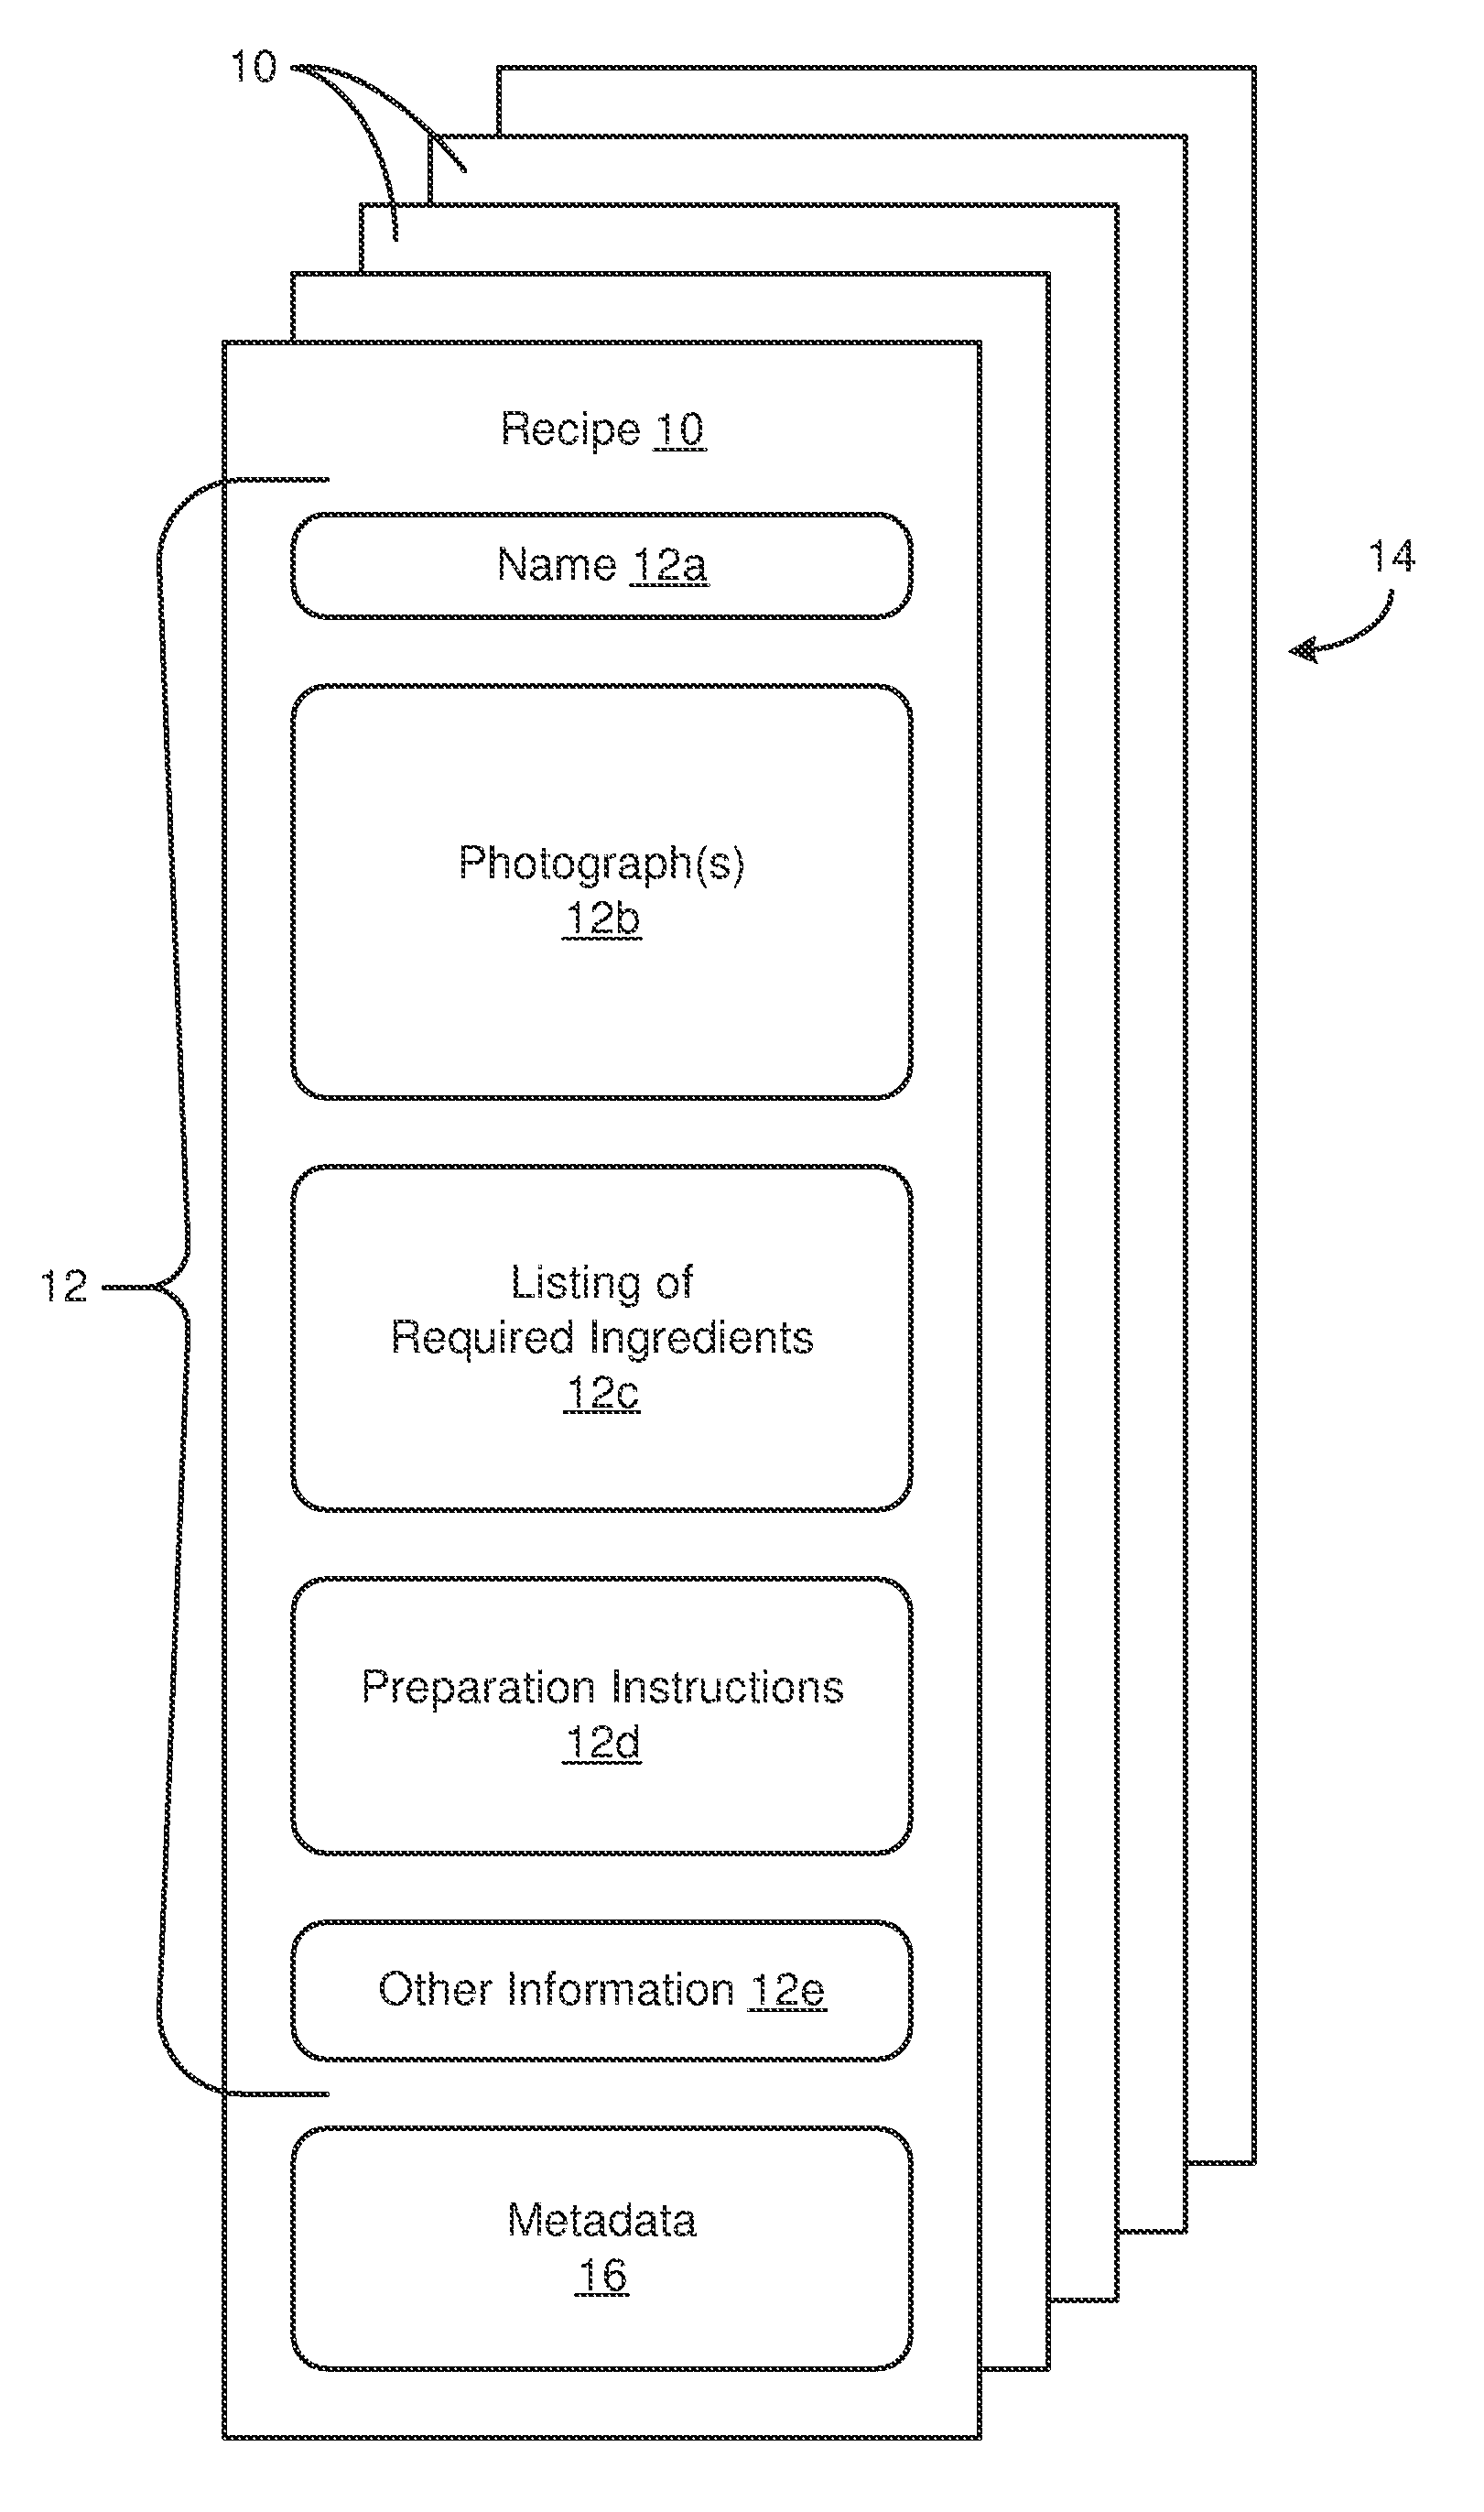 Recipe suggestion apparatus and method